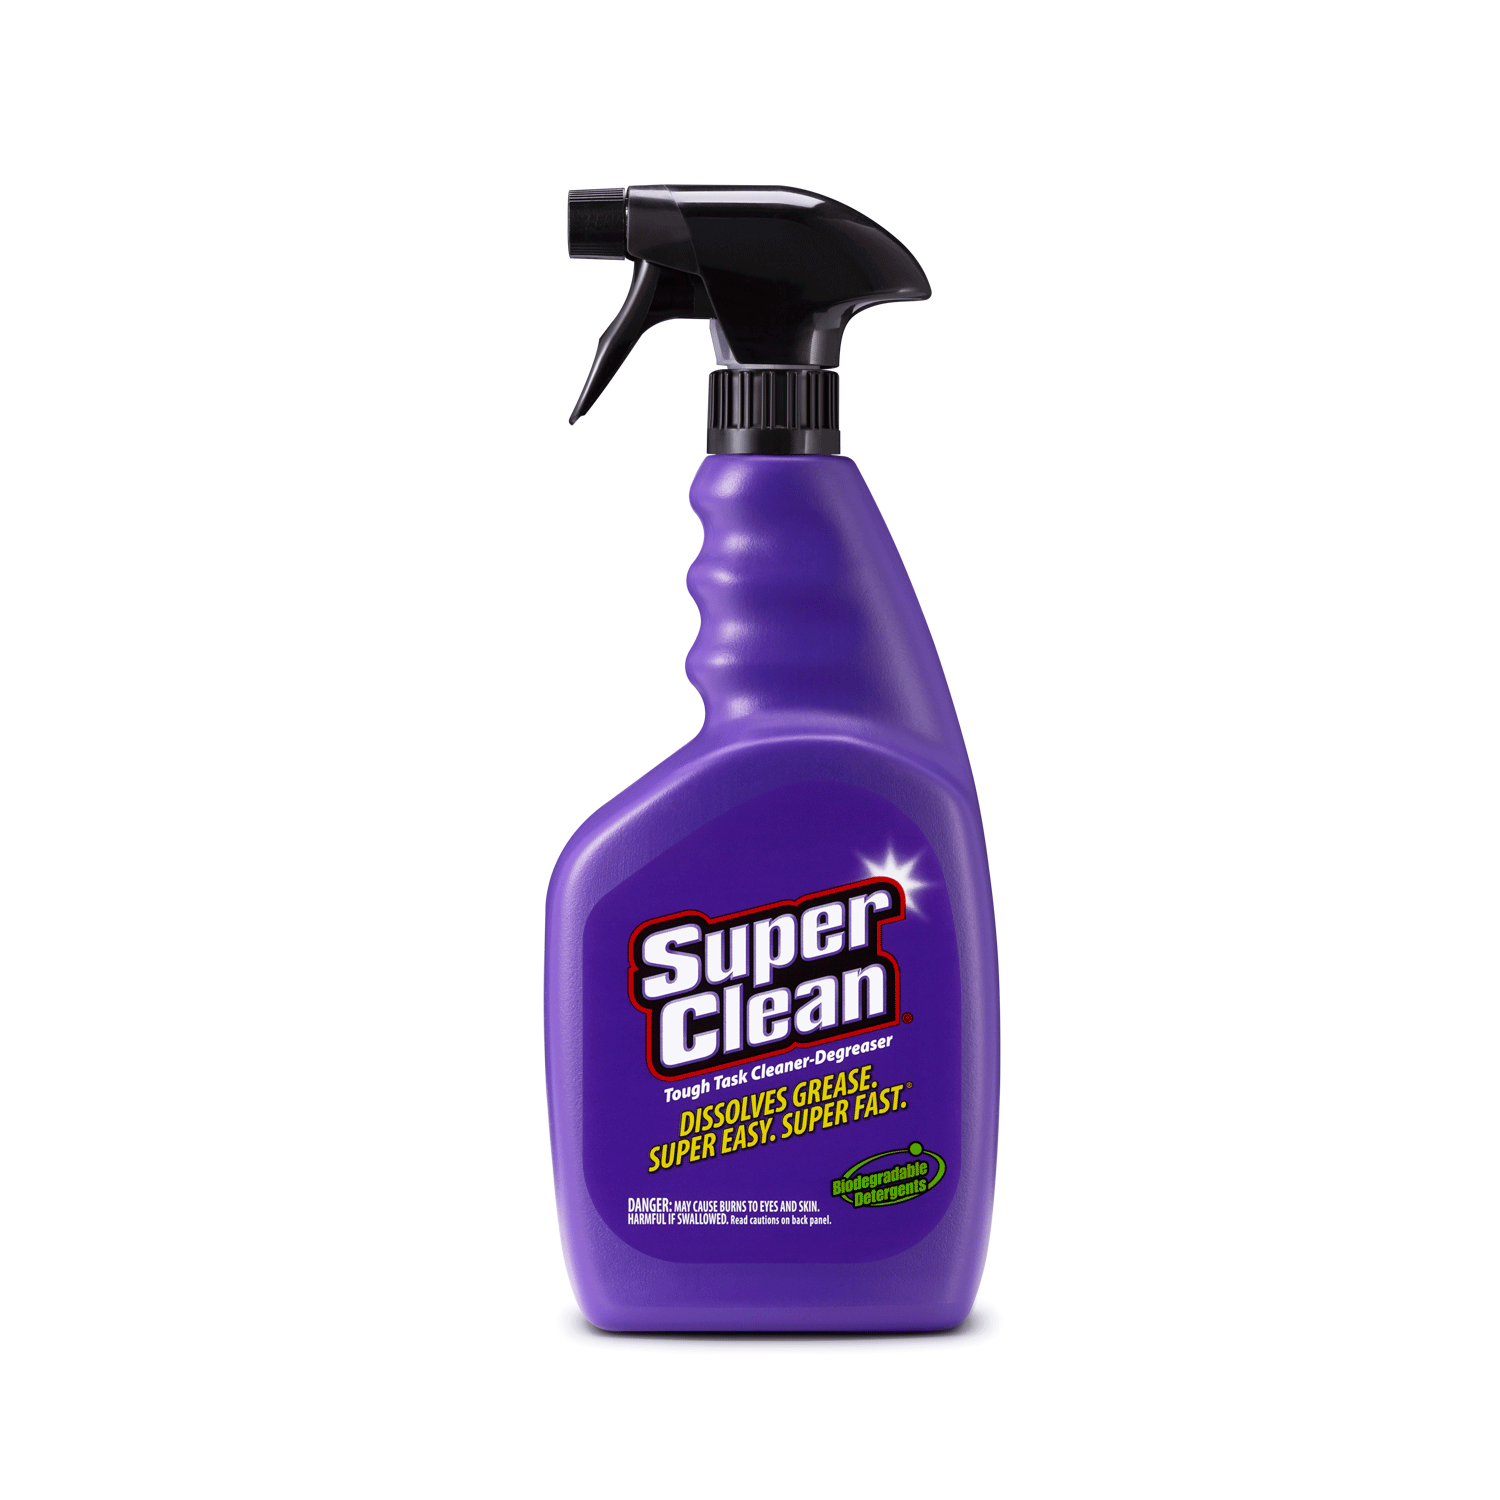 Super Clean Foaming Multi-Surface All Purpose Cleaner Degreaser Spray,  Biodegradable, Full Concentrate, 32 ounce